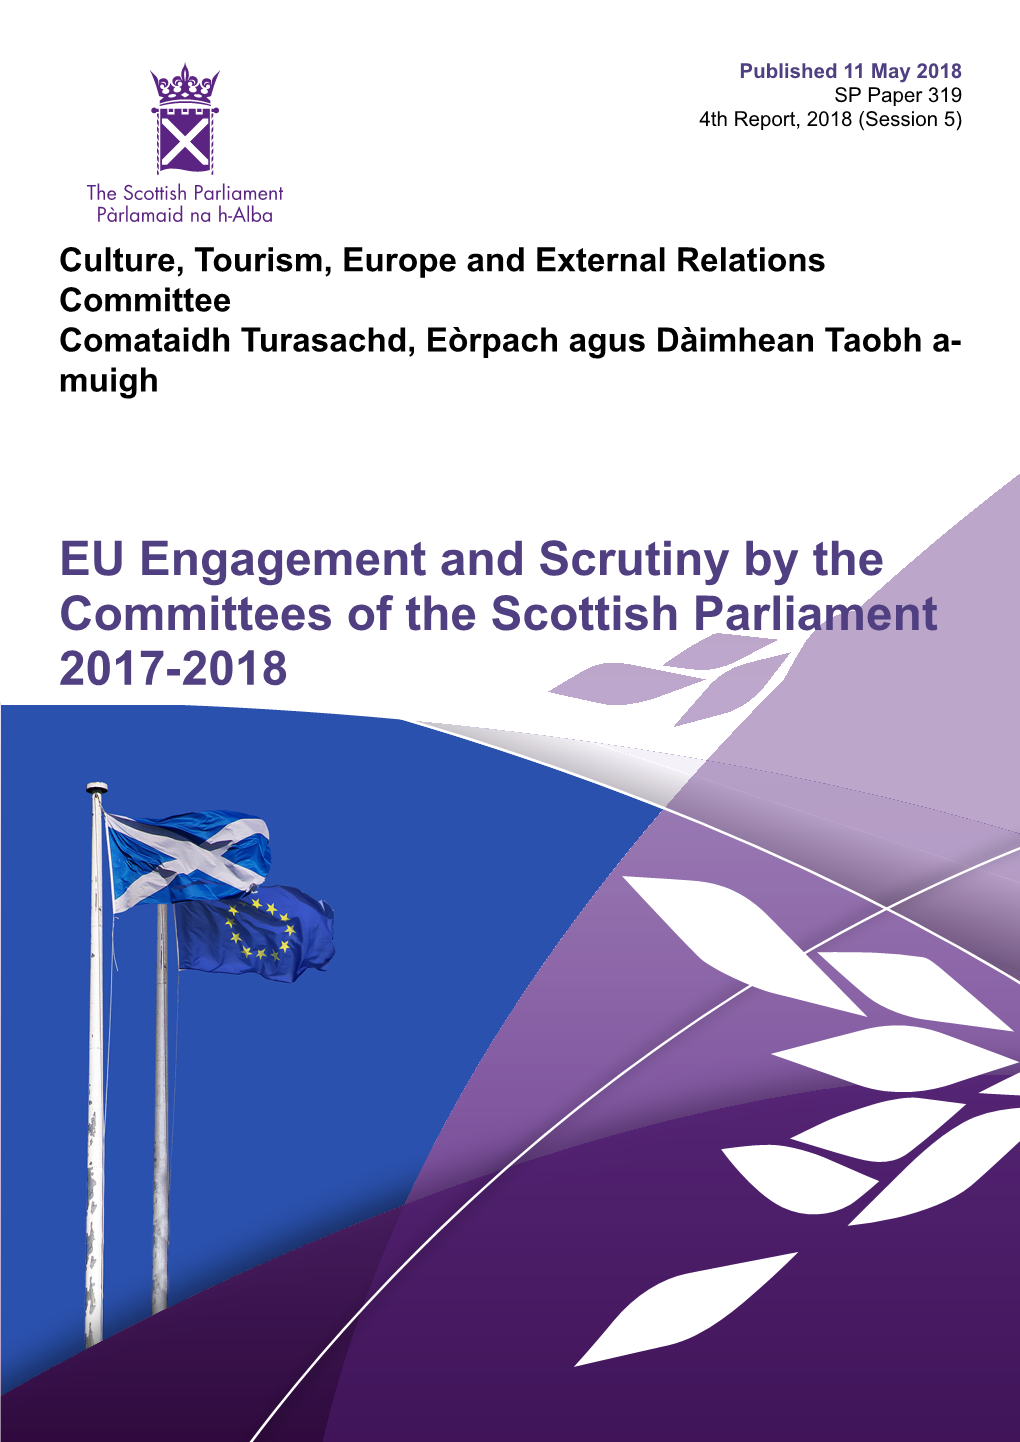 EU Engagement and Scrutiny by the Committees of the Scottish Parliament 2017-2018 Published in Scotland by the Scottish Parliamentary Corporate Body